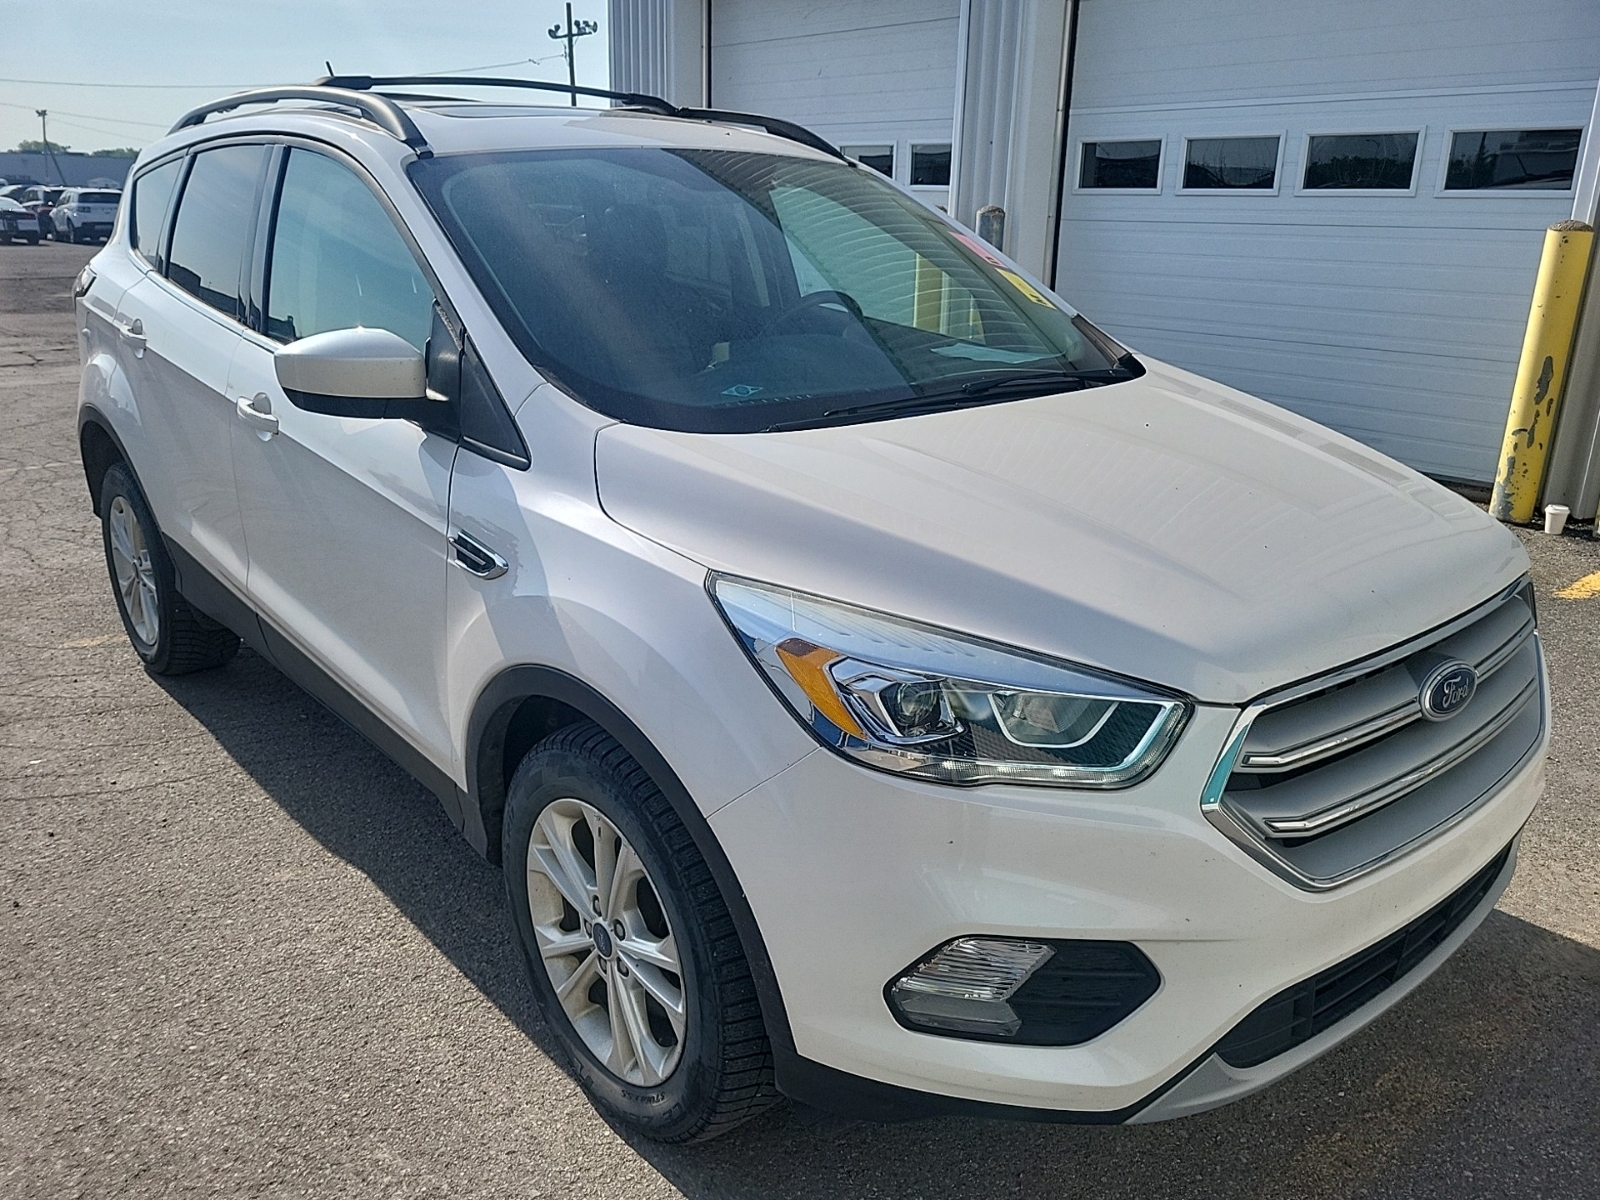 2018 Ford Escape SEL 4WD - LEATHER! NAV! BACK-UP CAM! PANO ROOF!